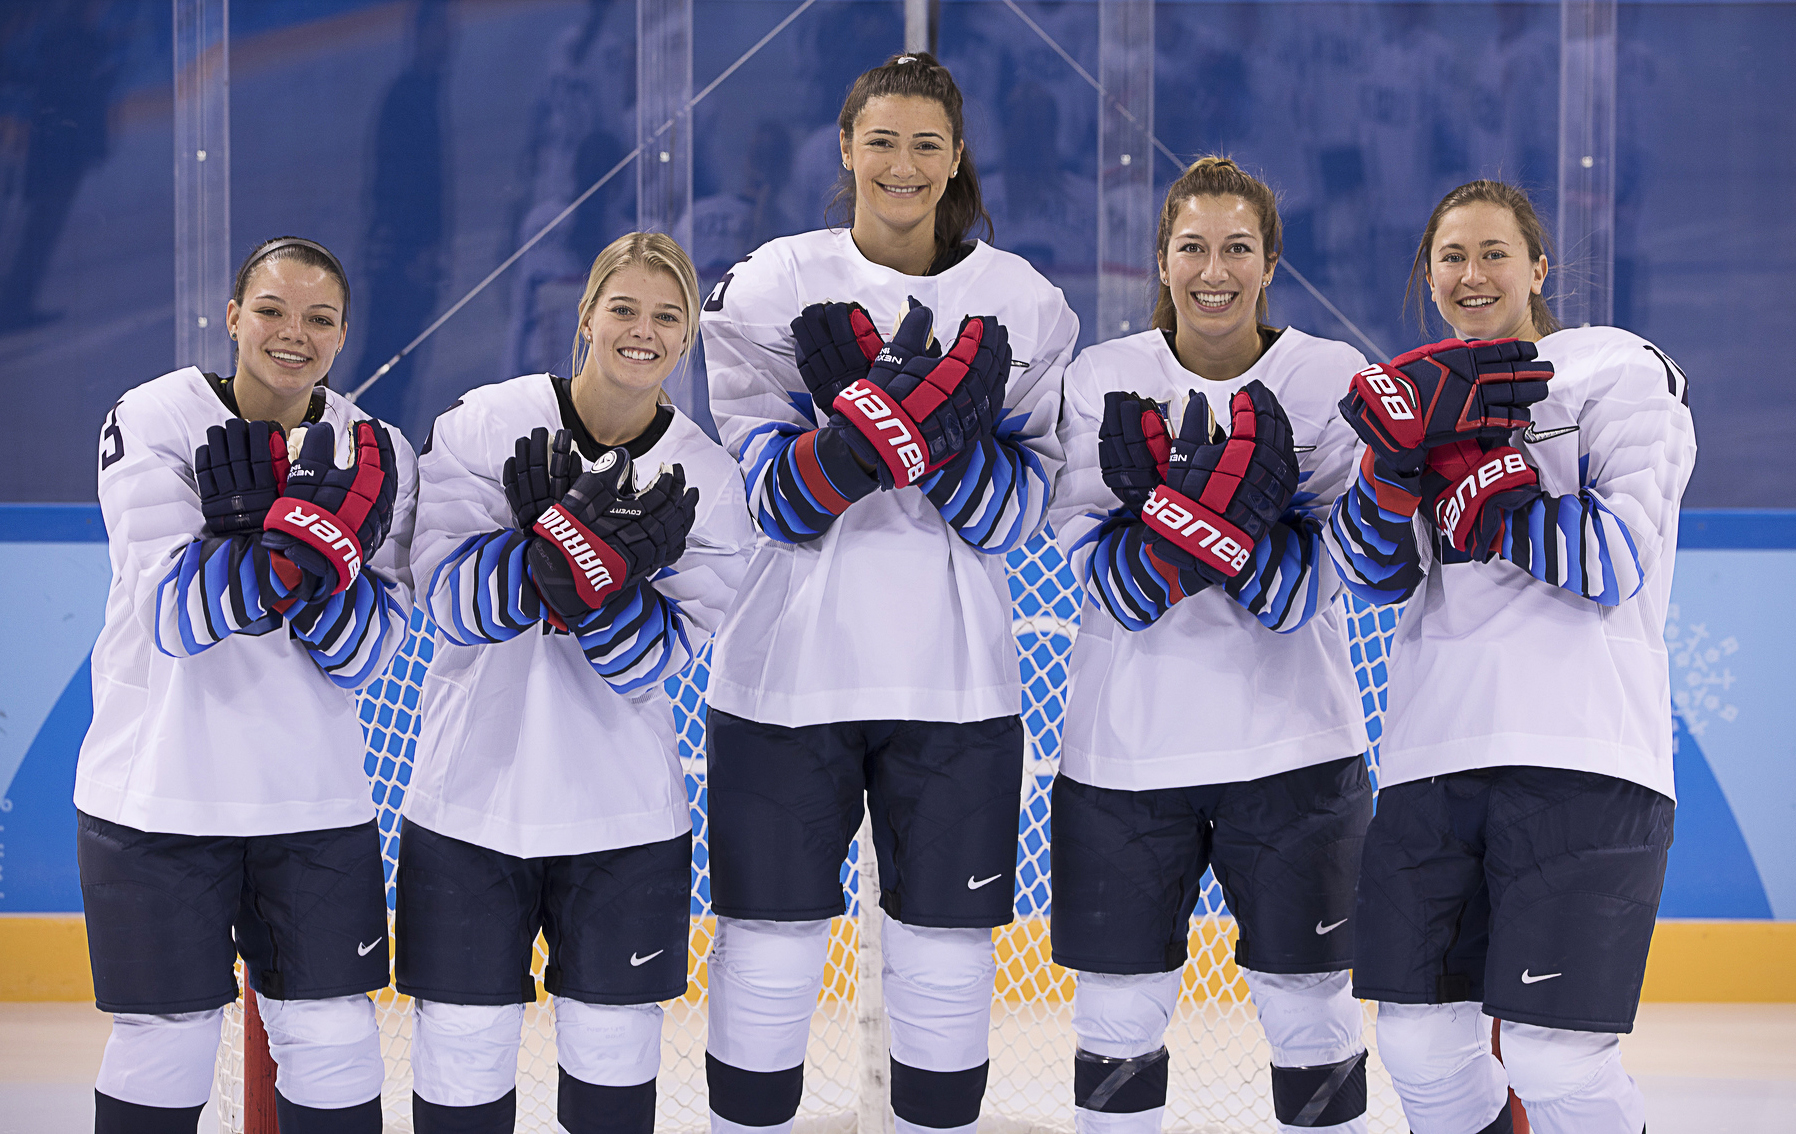 Cayla Barnes of Team USA’s Women’s Hockey Team Shares Her Experience at